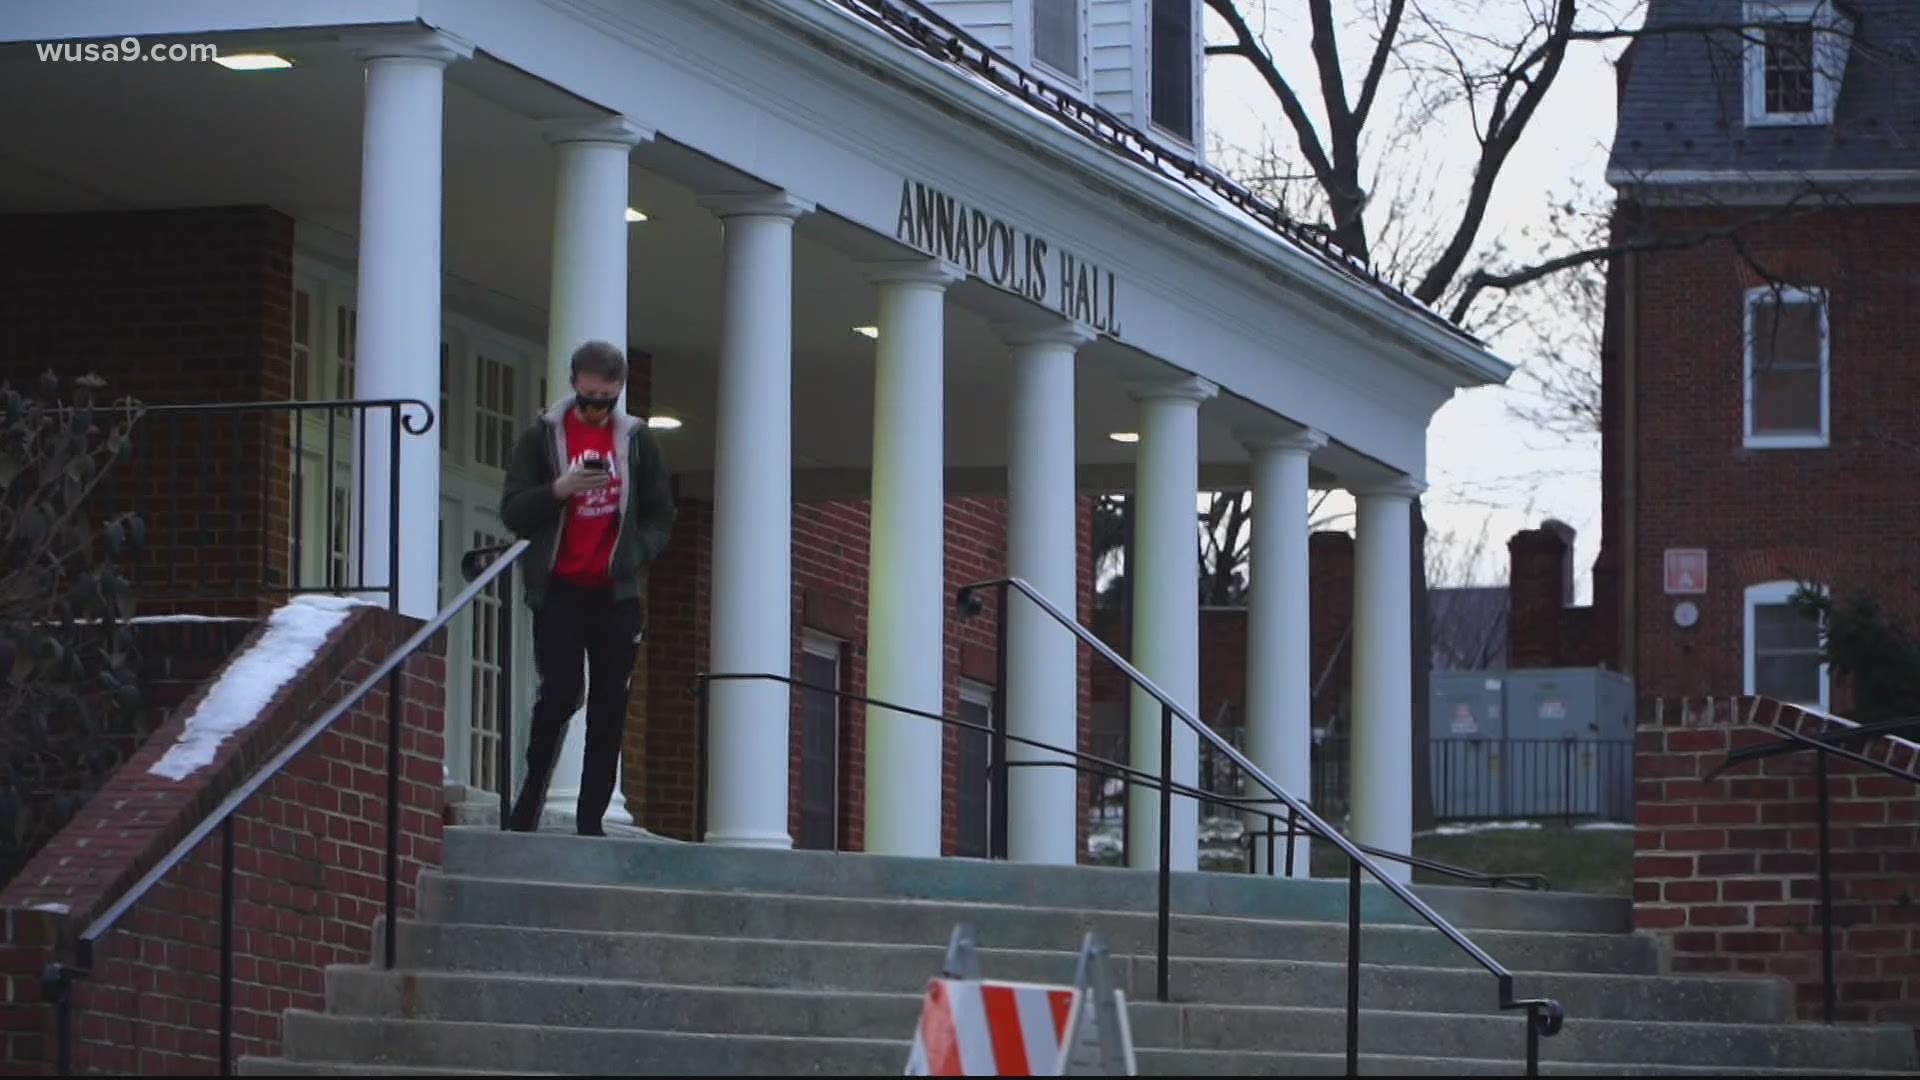 UMD courses will switch to all online for a week and officials say students on and off-campus should stay home and quarantine as much as possible.